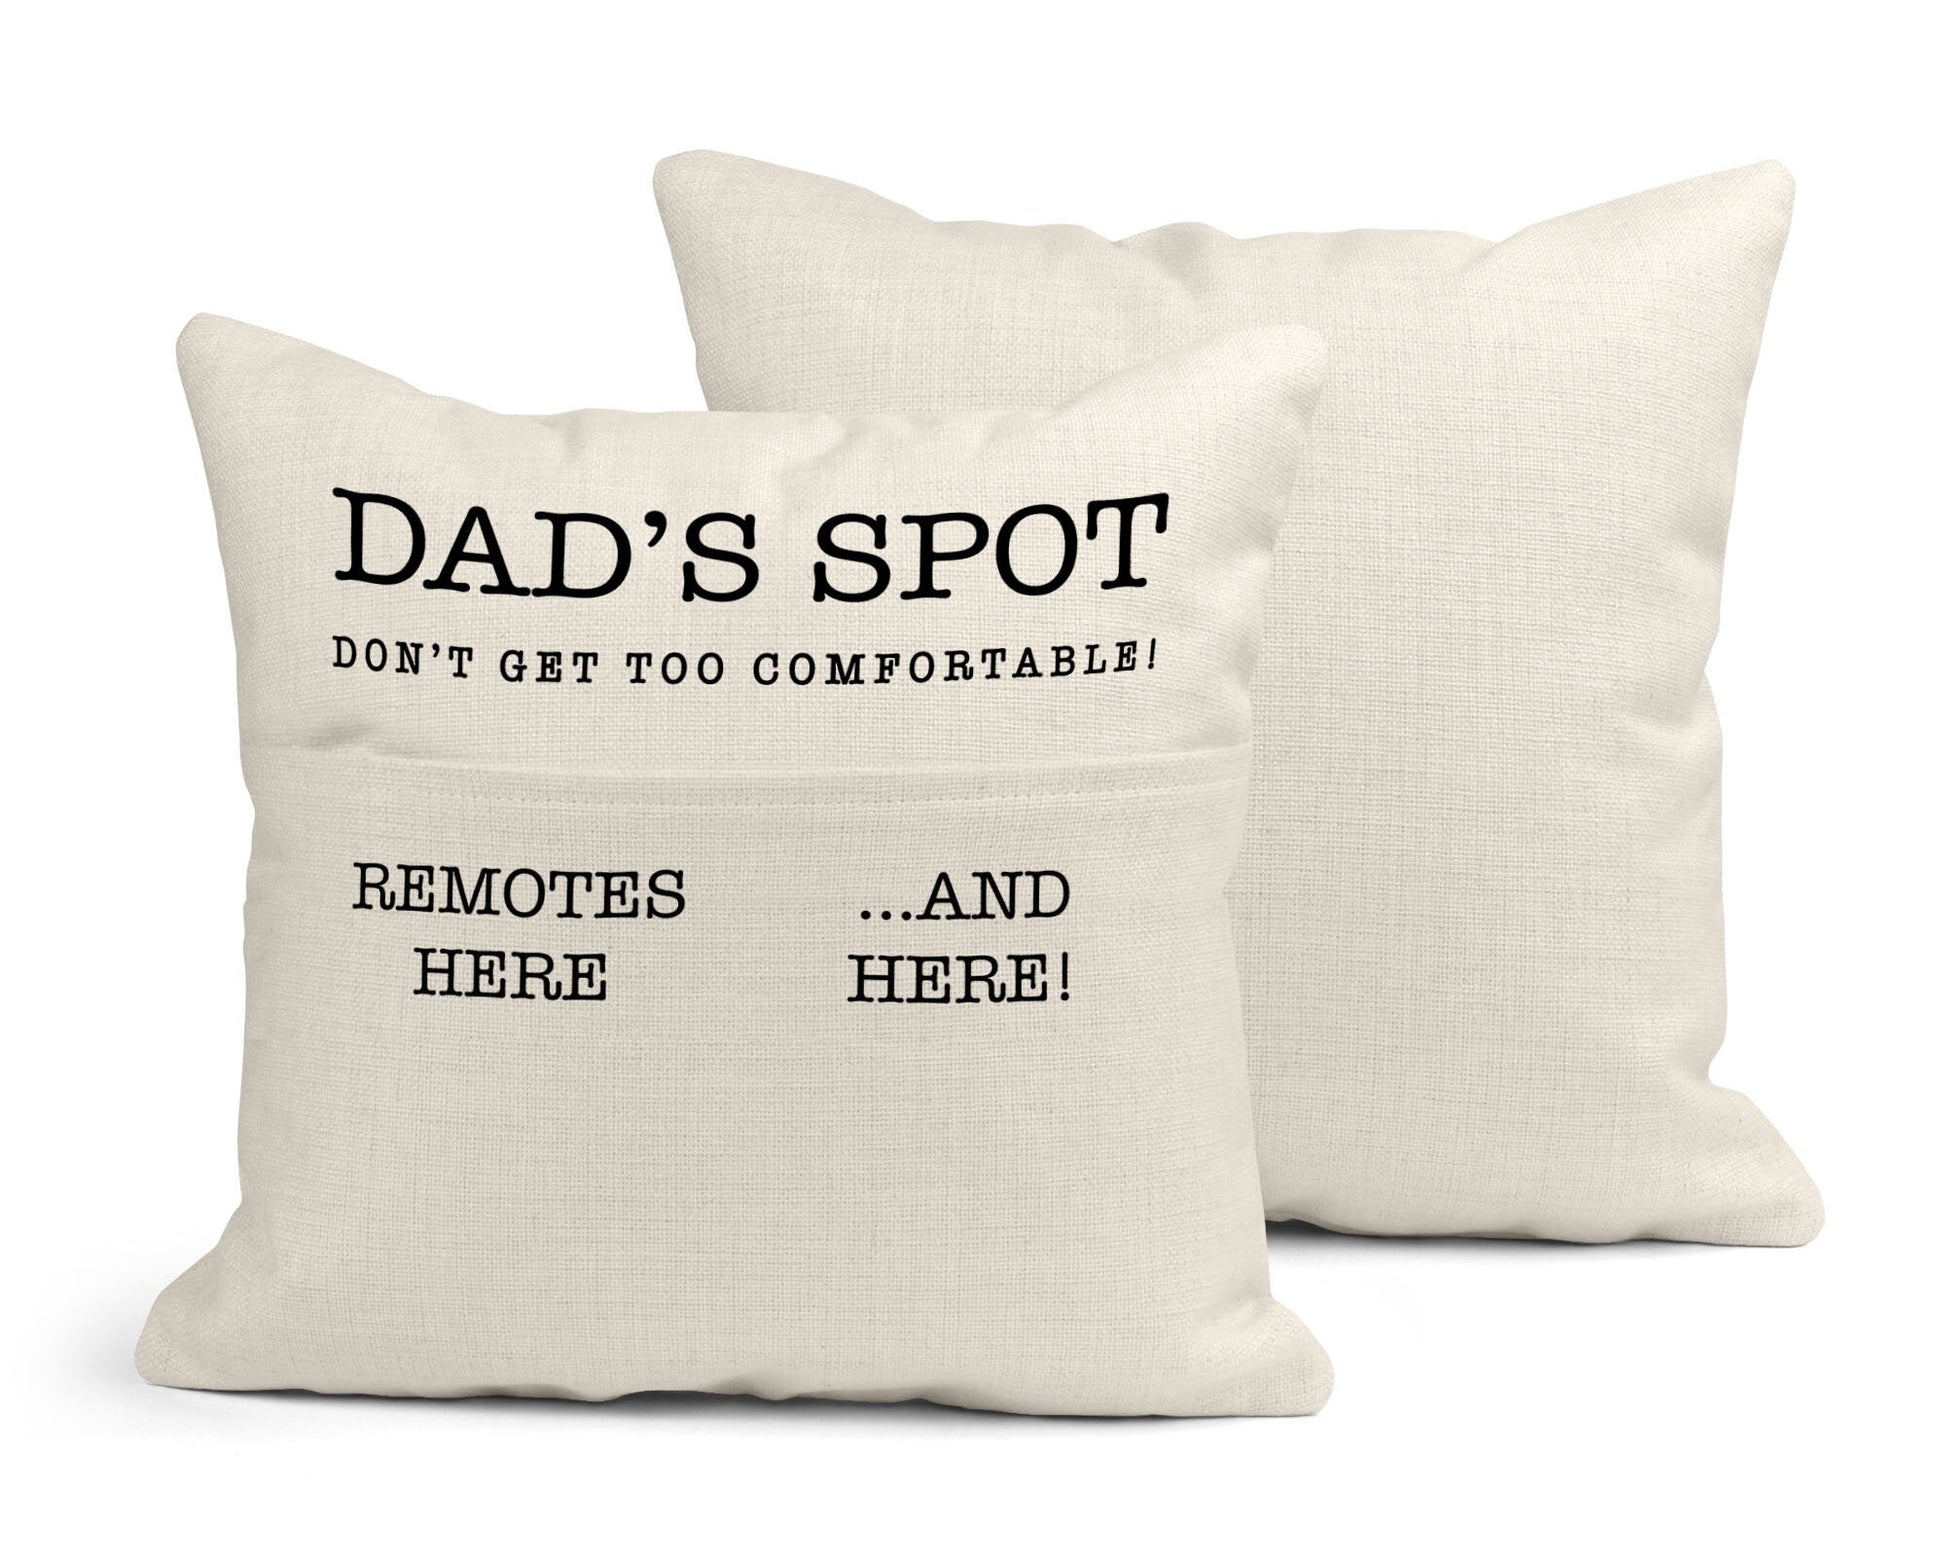 Custom Dad Remote Pillow for Dad, Personalized Pillowcase Gift Ideas Throw Pillow Covers